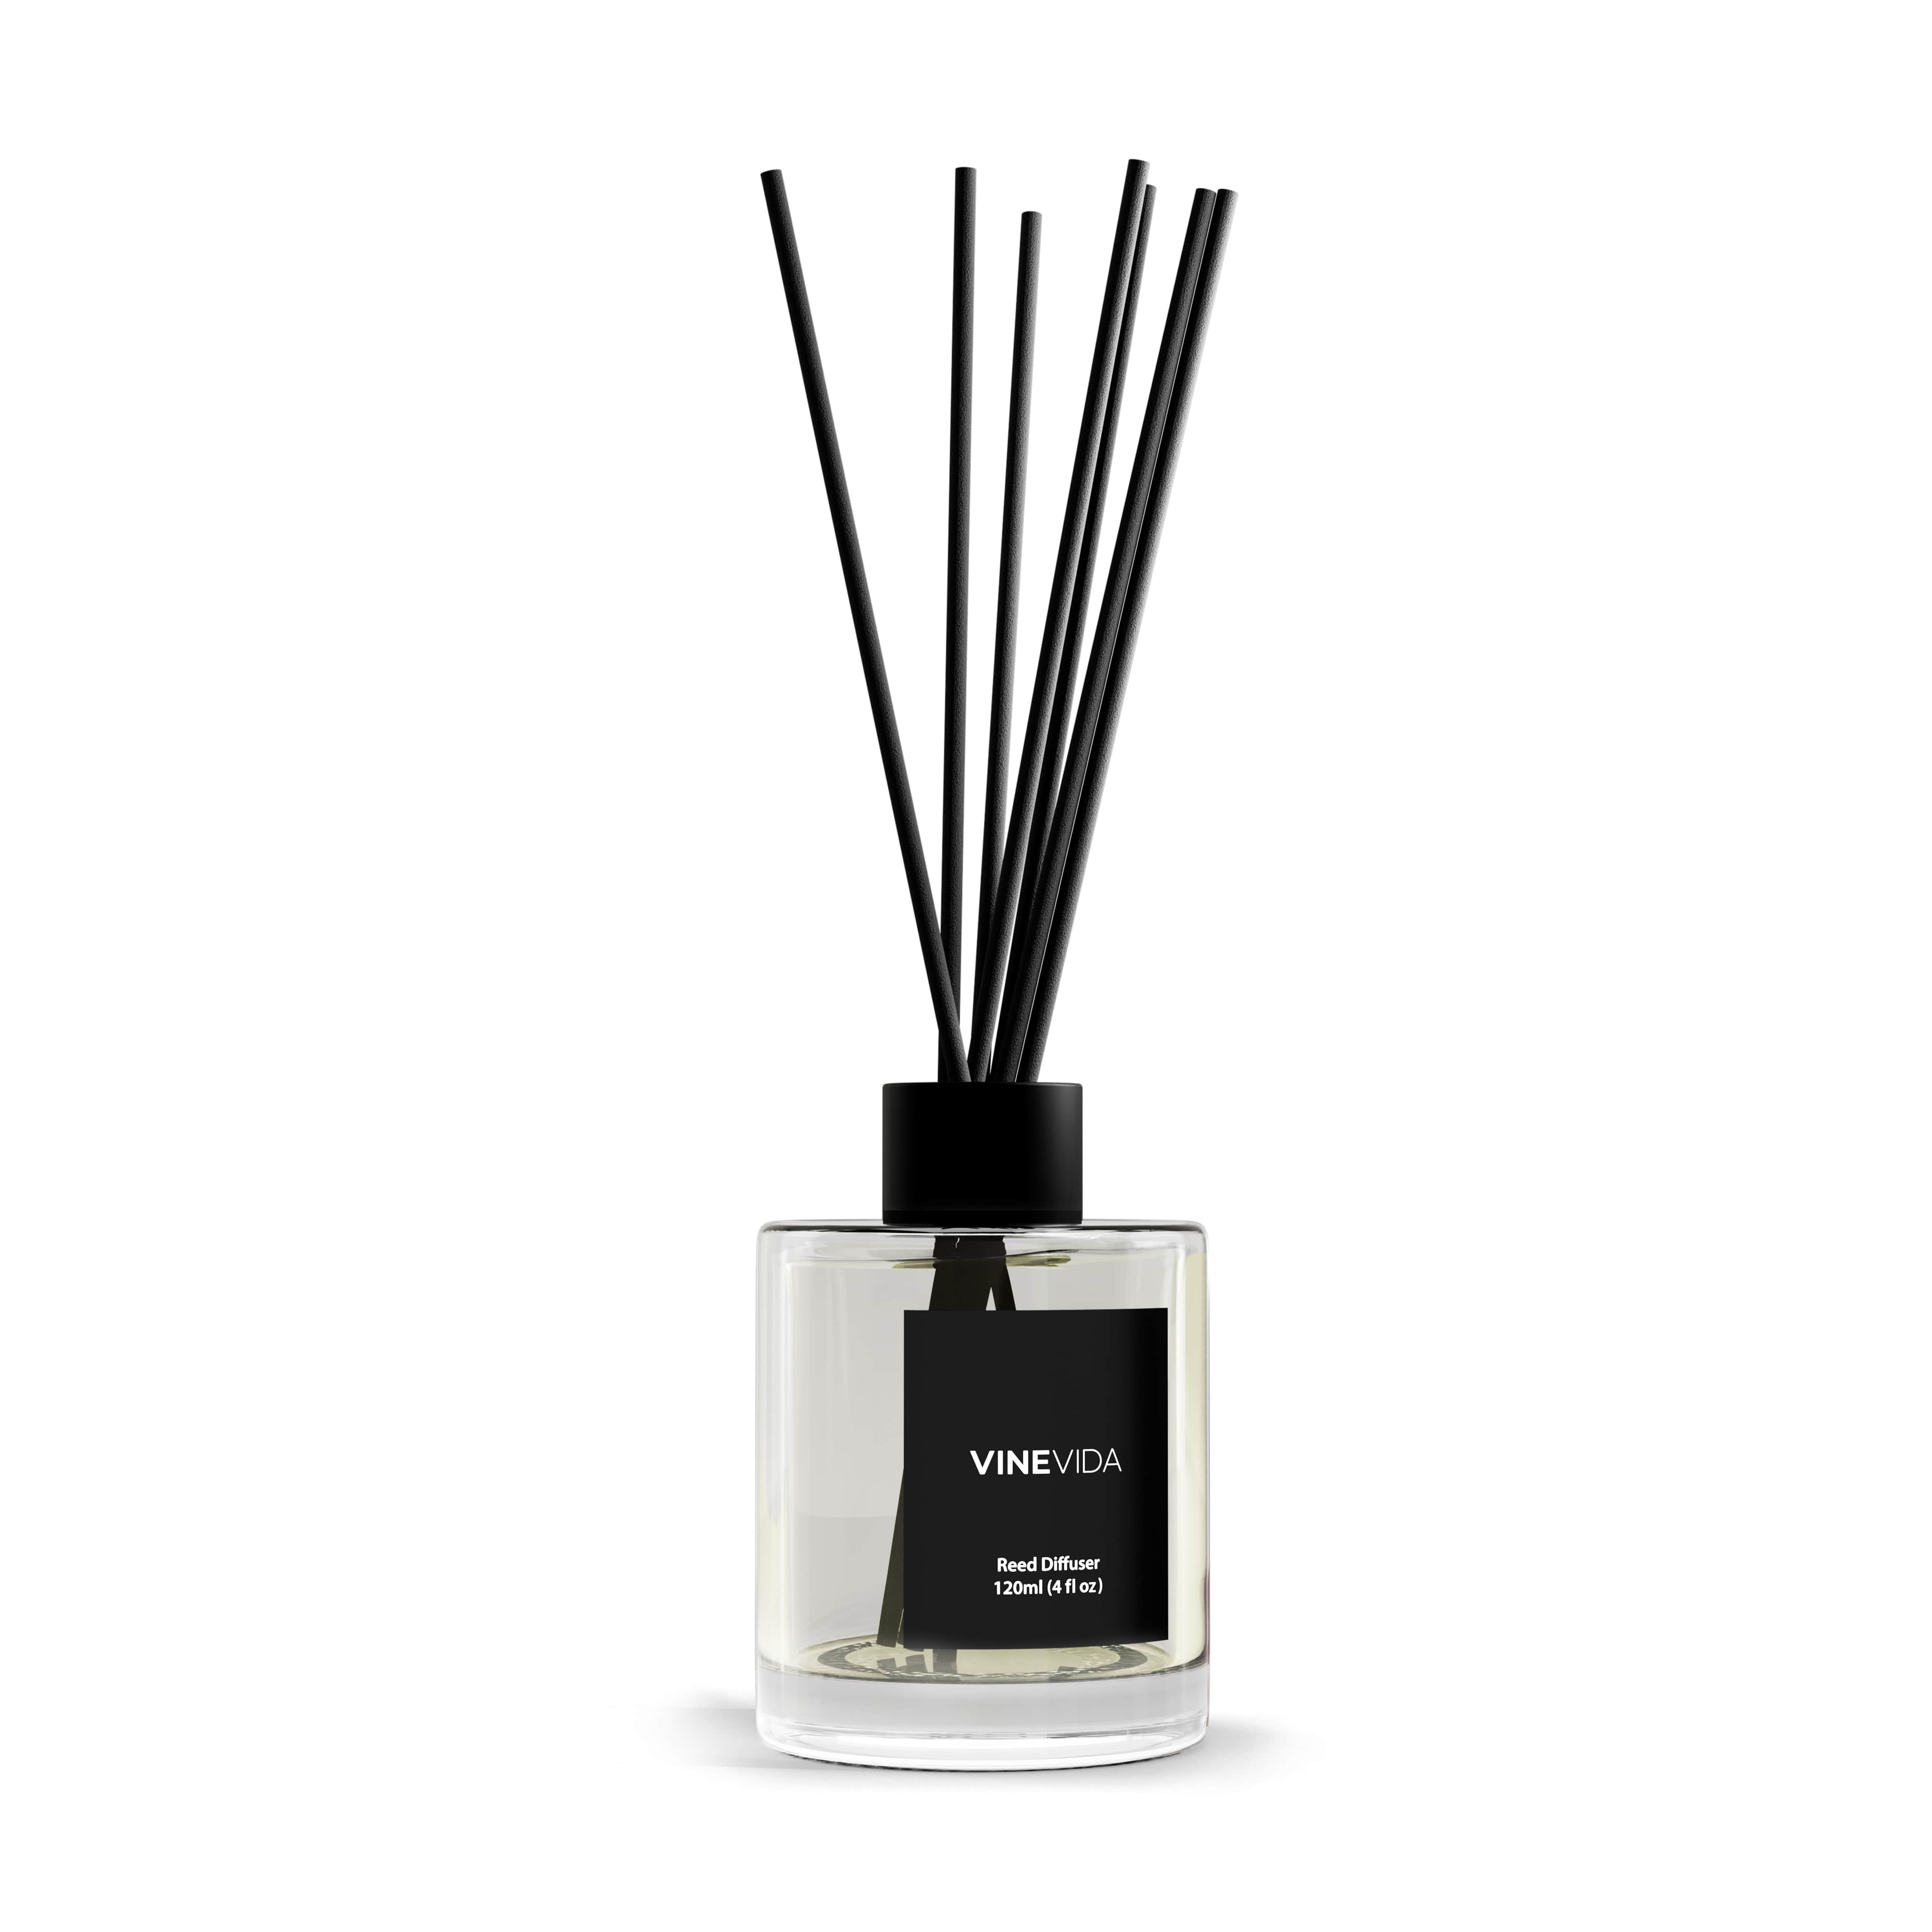 NO. 2 Reed Diffuser - Apple Hot Baked Pie